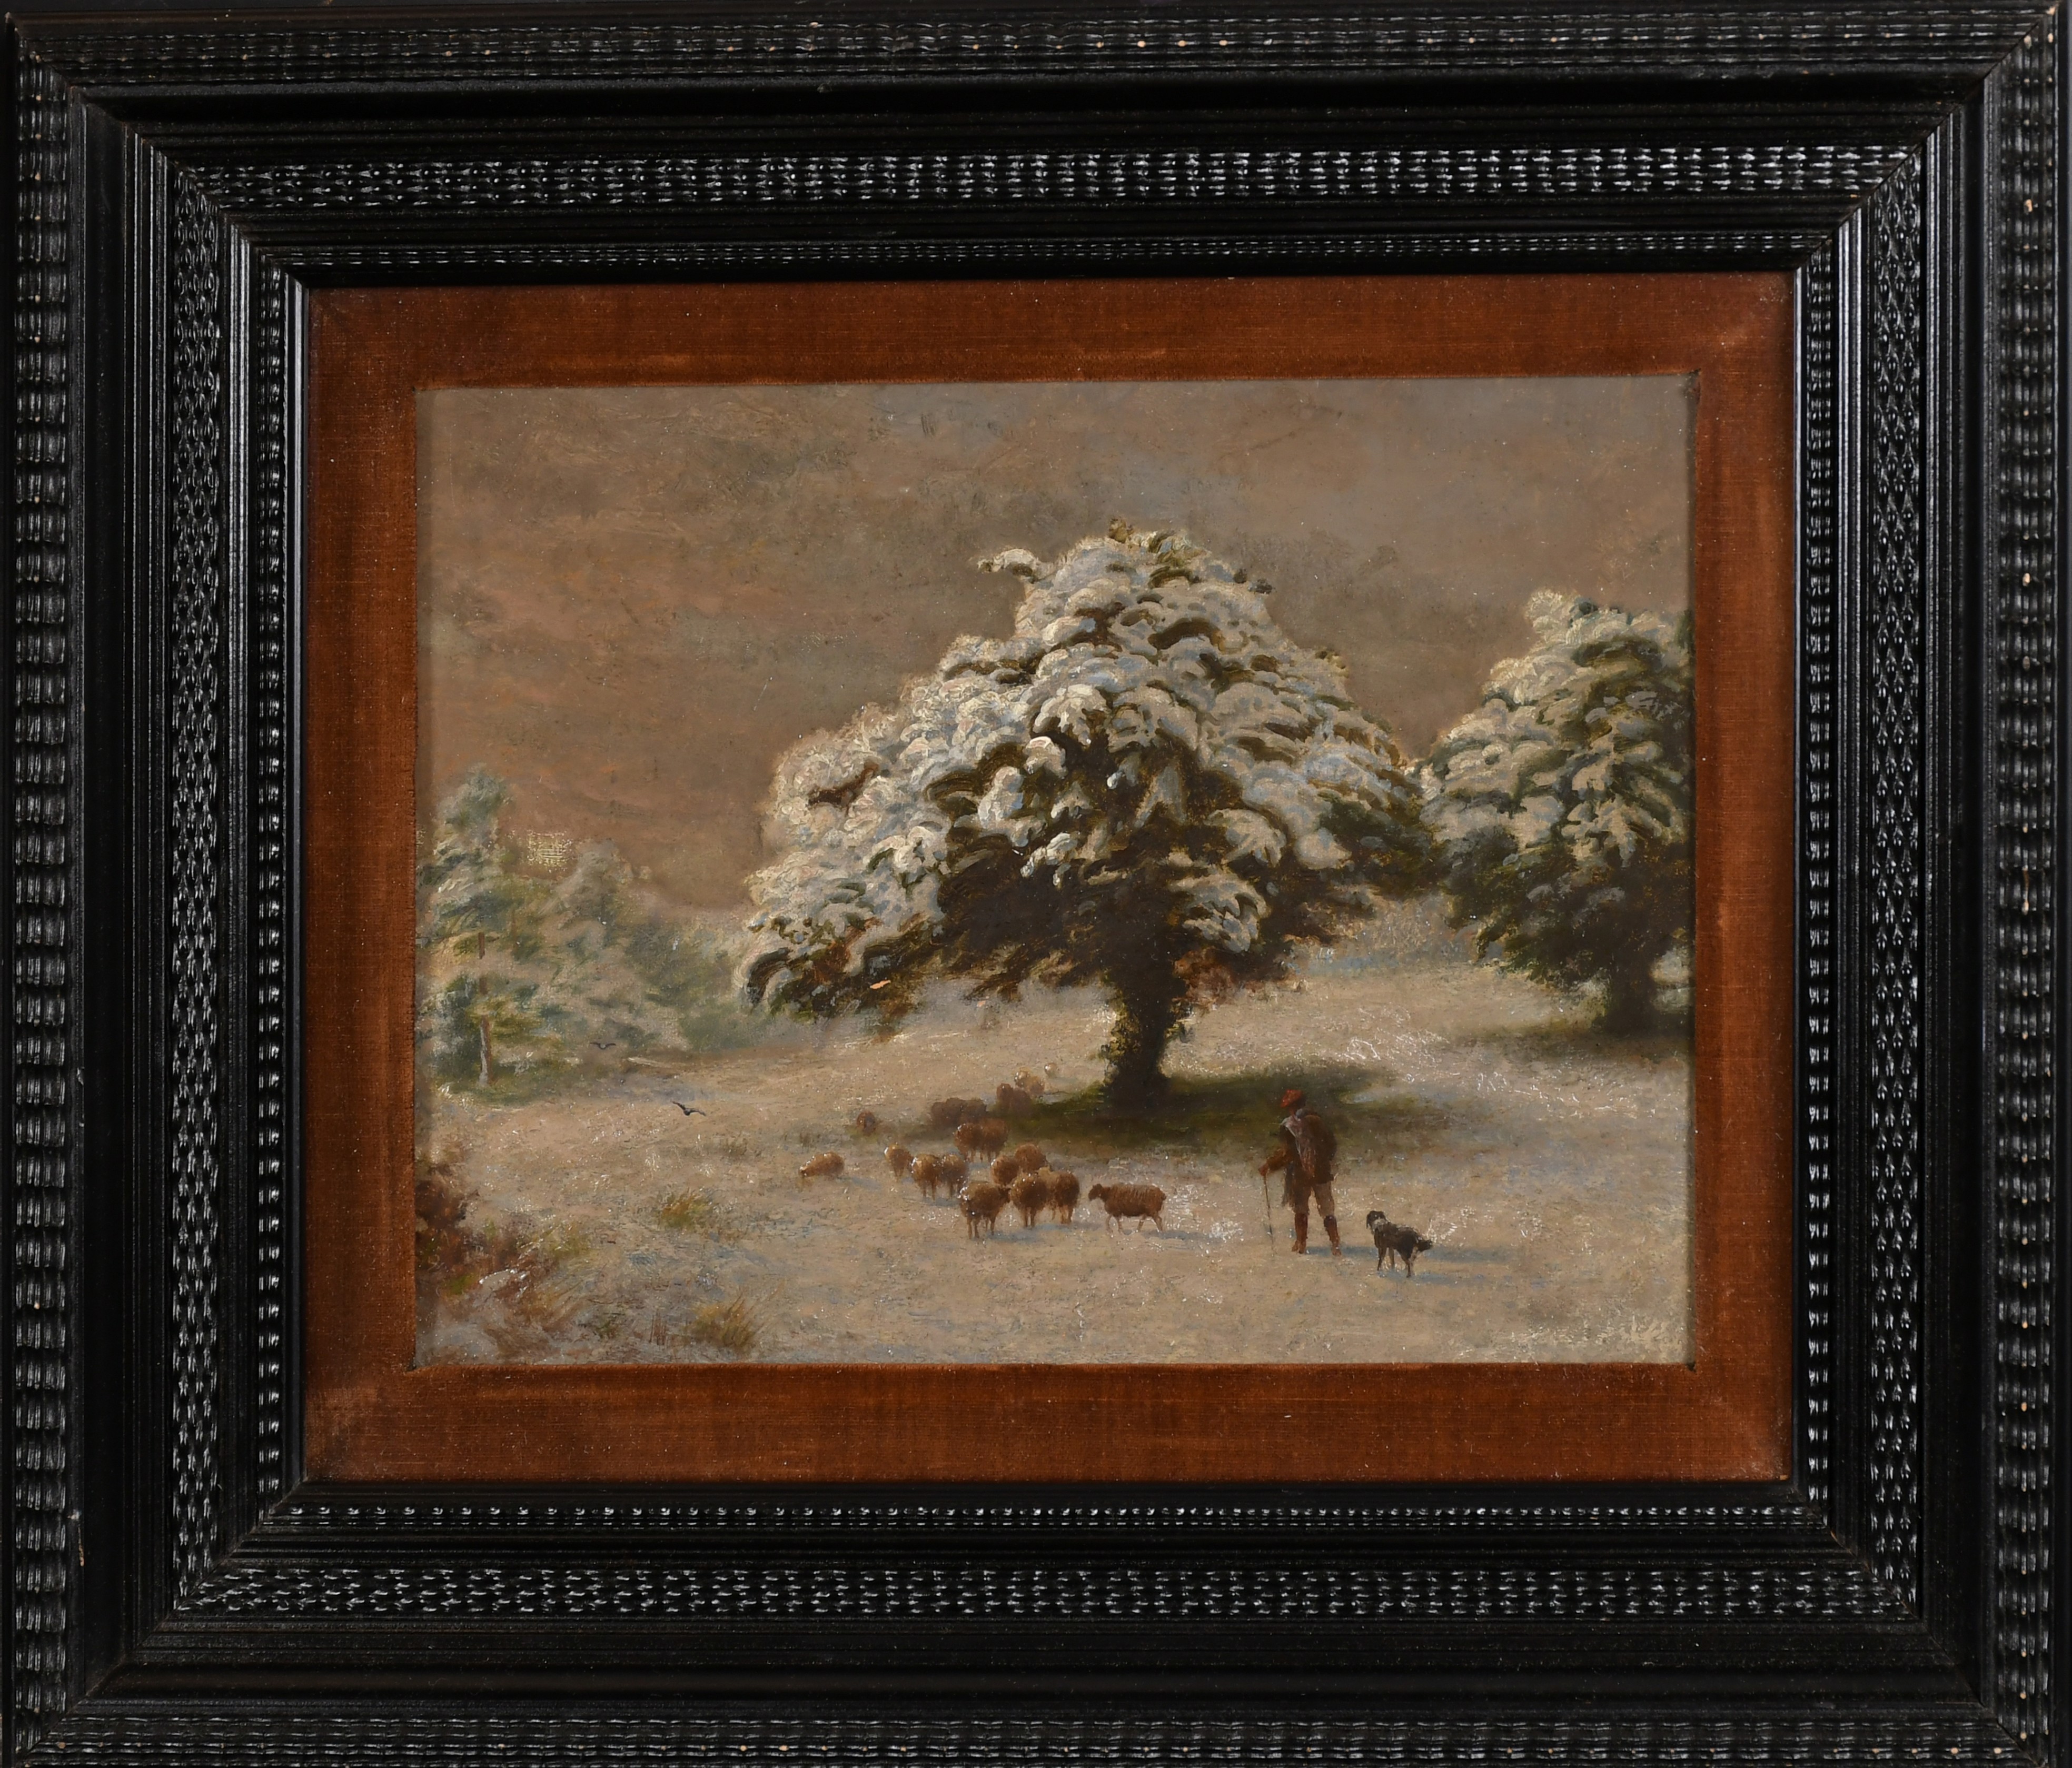 19th Century English School. Shepherd and Flock in a Winter Landscape, Oil on board, 8" x 10.5" ( - Image 2 of 3